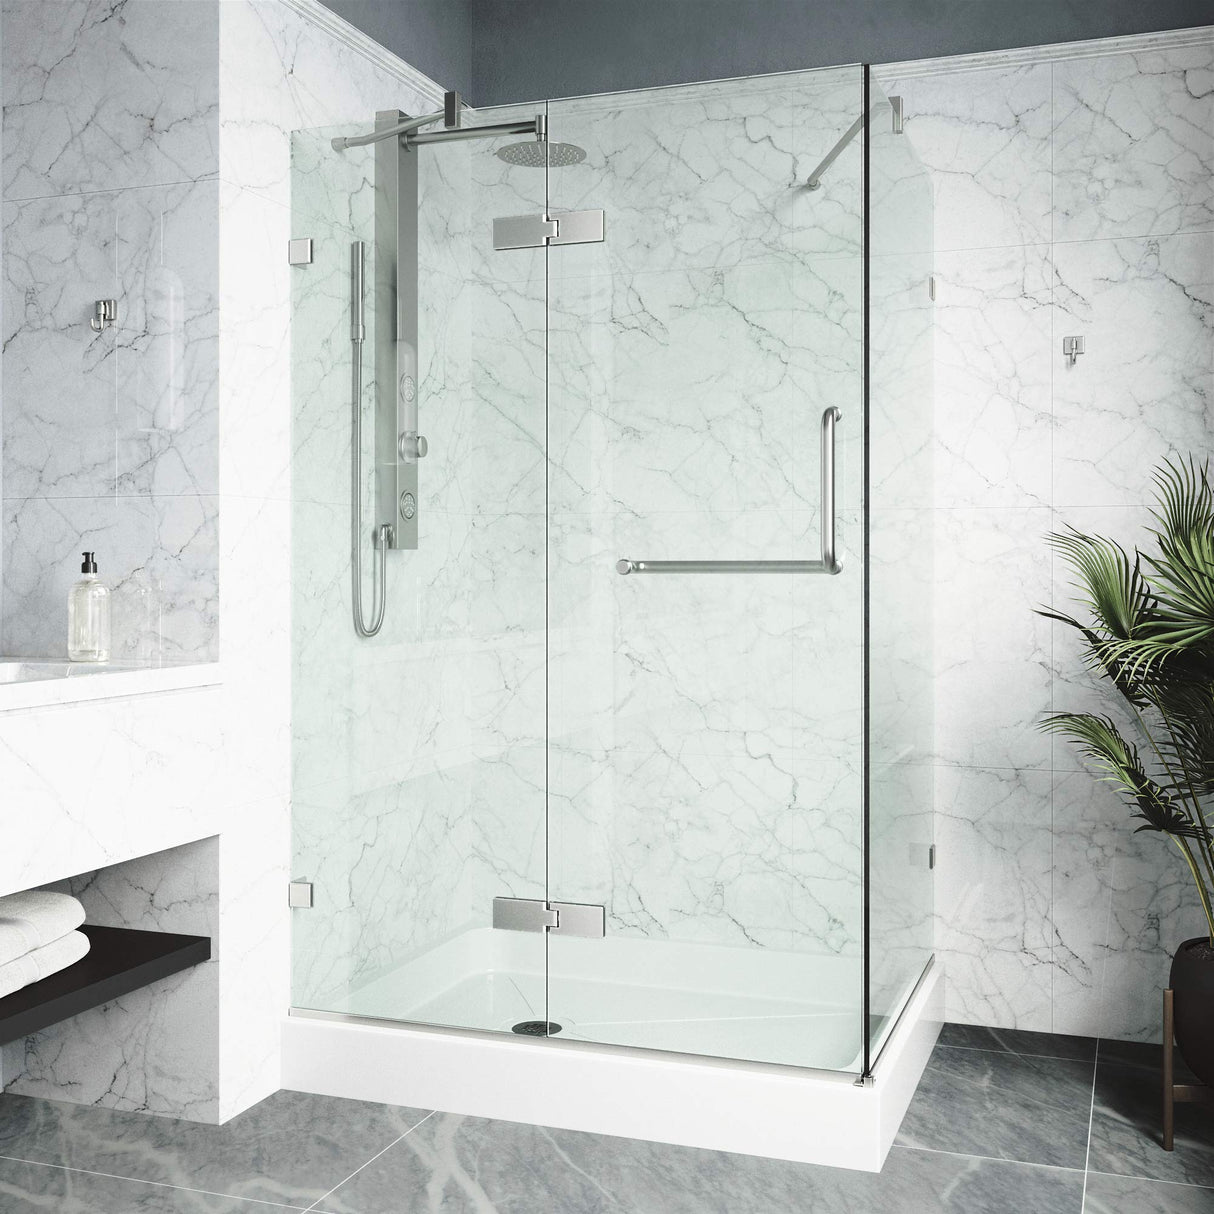 VIGO 32 in. x 48 in. x 79 in. Monteray Frameless Hinged Rectangle Shower Enclosure with Clear 0.38" Tempered Glass and Hardware in Brushed Nickel Finish with Right Handle and Base - VG6011BNCL48WL